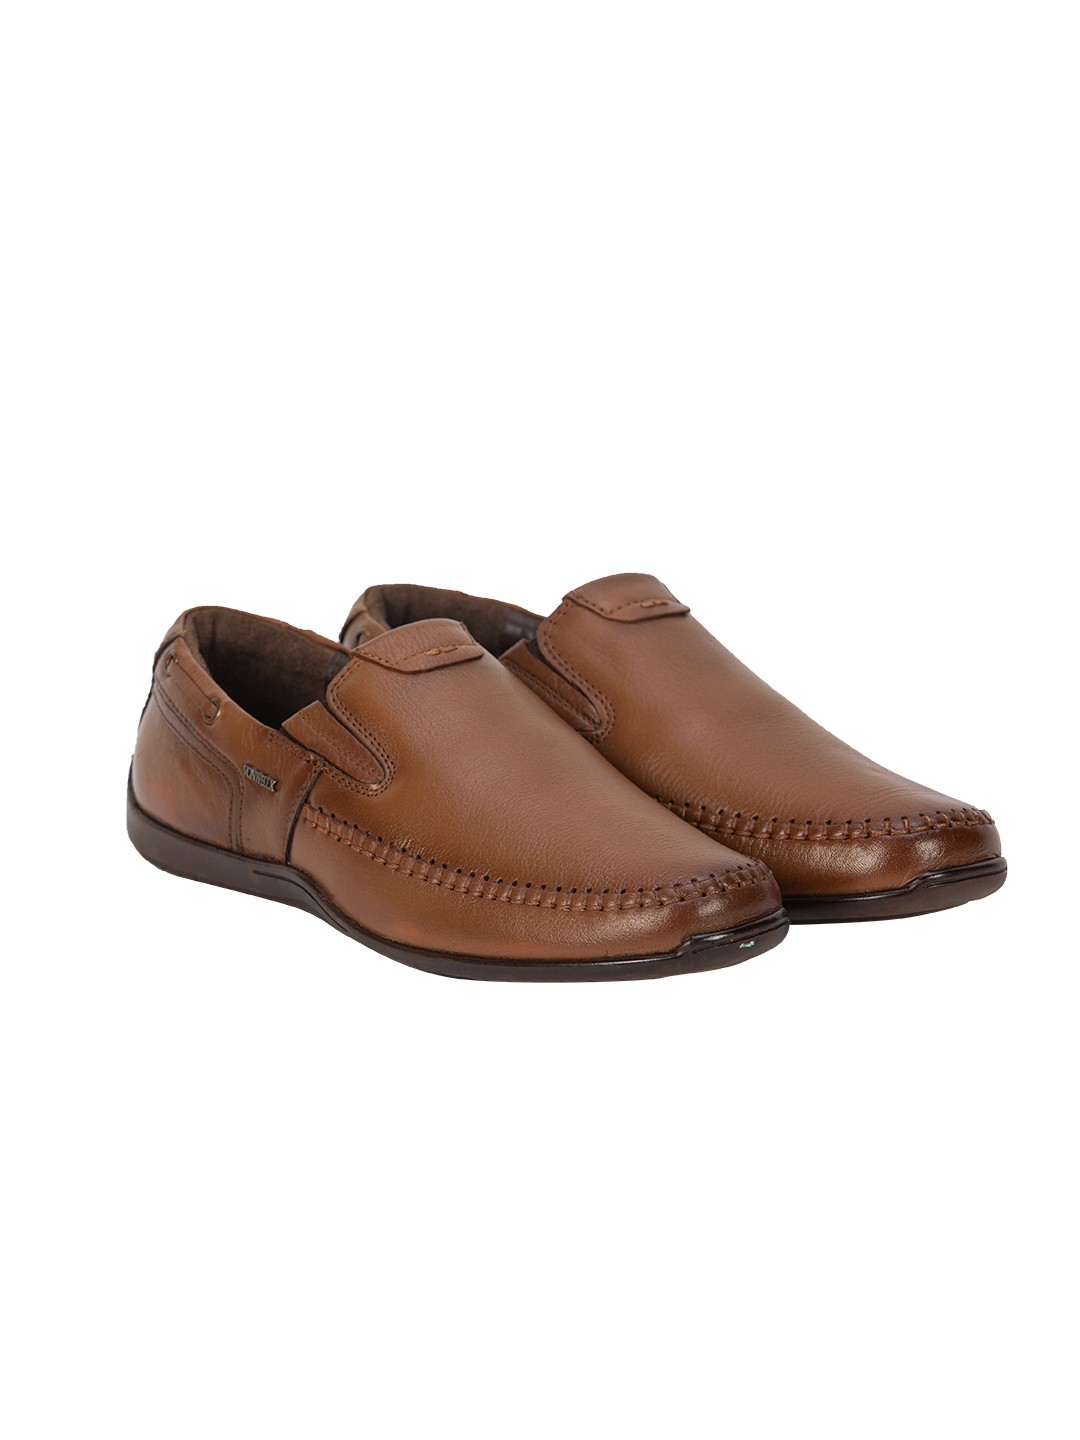 Buy Von Wellx Axel Casual Tan Shoes Online in Pune